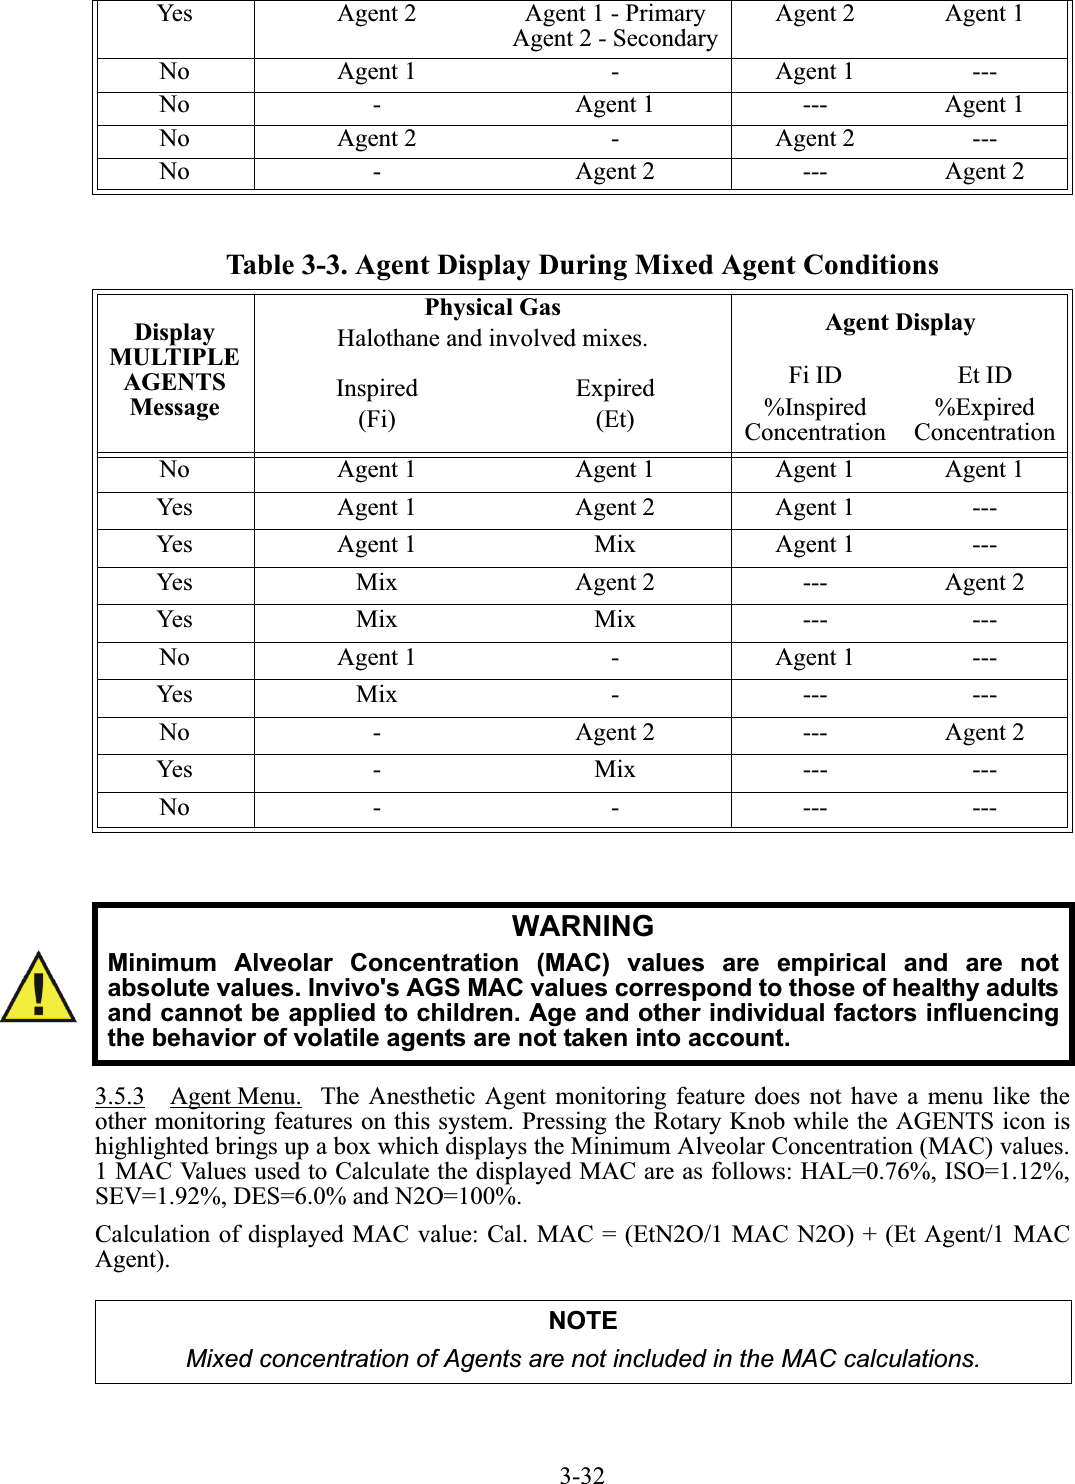 3-32Table 3-3. Agent Display During Mixed Agent Conditions3.5.3 Agent Menu.  The Anesthetic Agent monitoring feature does not have a menu like theother monitoring features on this system. Pressing the Rotary Knob while the AGENTS icon ishighlighted brings up a box which displays the Minimum Alveolar Concentration (MAC) values.1 MAC Values used to Calculate the displayed MAC are as follows: HAL=0.76%, ISO=1.12%,SEV=1.92%, DES=6.0% and N2O=100%.Calculation of displayed MAC value: Cal. MAC = (EtN2O/1 MAC N2O) + (Et Agent/1 MACAgent).Yes Agent 2 Agent 1 - PrimaryAgent 2 - SecondaryAgent 2 Agent 1No Agent 1 - Agent 1 ---No - Agent 1 --- Agent 1No Agent 2 - Agent 2 ---No - Agent 2 --- Agent 2Display MULTIPLE AGENTS MessagePhysical GasHalothane and involved mixes. Agent DisplayInspired(Fi)Expired(Et)Fi ID%InspiredConcentrationEt ID%ExpiredConcentrationNo Agent 1 Agent 1 Agent 1 Agent 1Yes Agent 1 Agent 2 Agent 1 ---Yes Agent 1 Mix Agent 1 ---Yes Mix Agent 2 --- Agent 2Yes Mix Mix --- ---No Agent 1 - Agent 1 ---Yes Mix - --- ---No - Agent 2 --- Agent 2Yes - Mix --- ---No - - --- ---WARNINGMinimum Alveolar Concentration (MAC) values are empirical and are notabsolute values. Invivo&apos;s AGS MAC values correspond to those of healthy adultsand cannot be applied to children. Age and other individual factors influencingthe behavior of volatile agents are not taken into account.NOTEMixed concentration of Agents are not included in the MAC calculations.